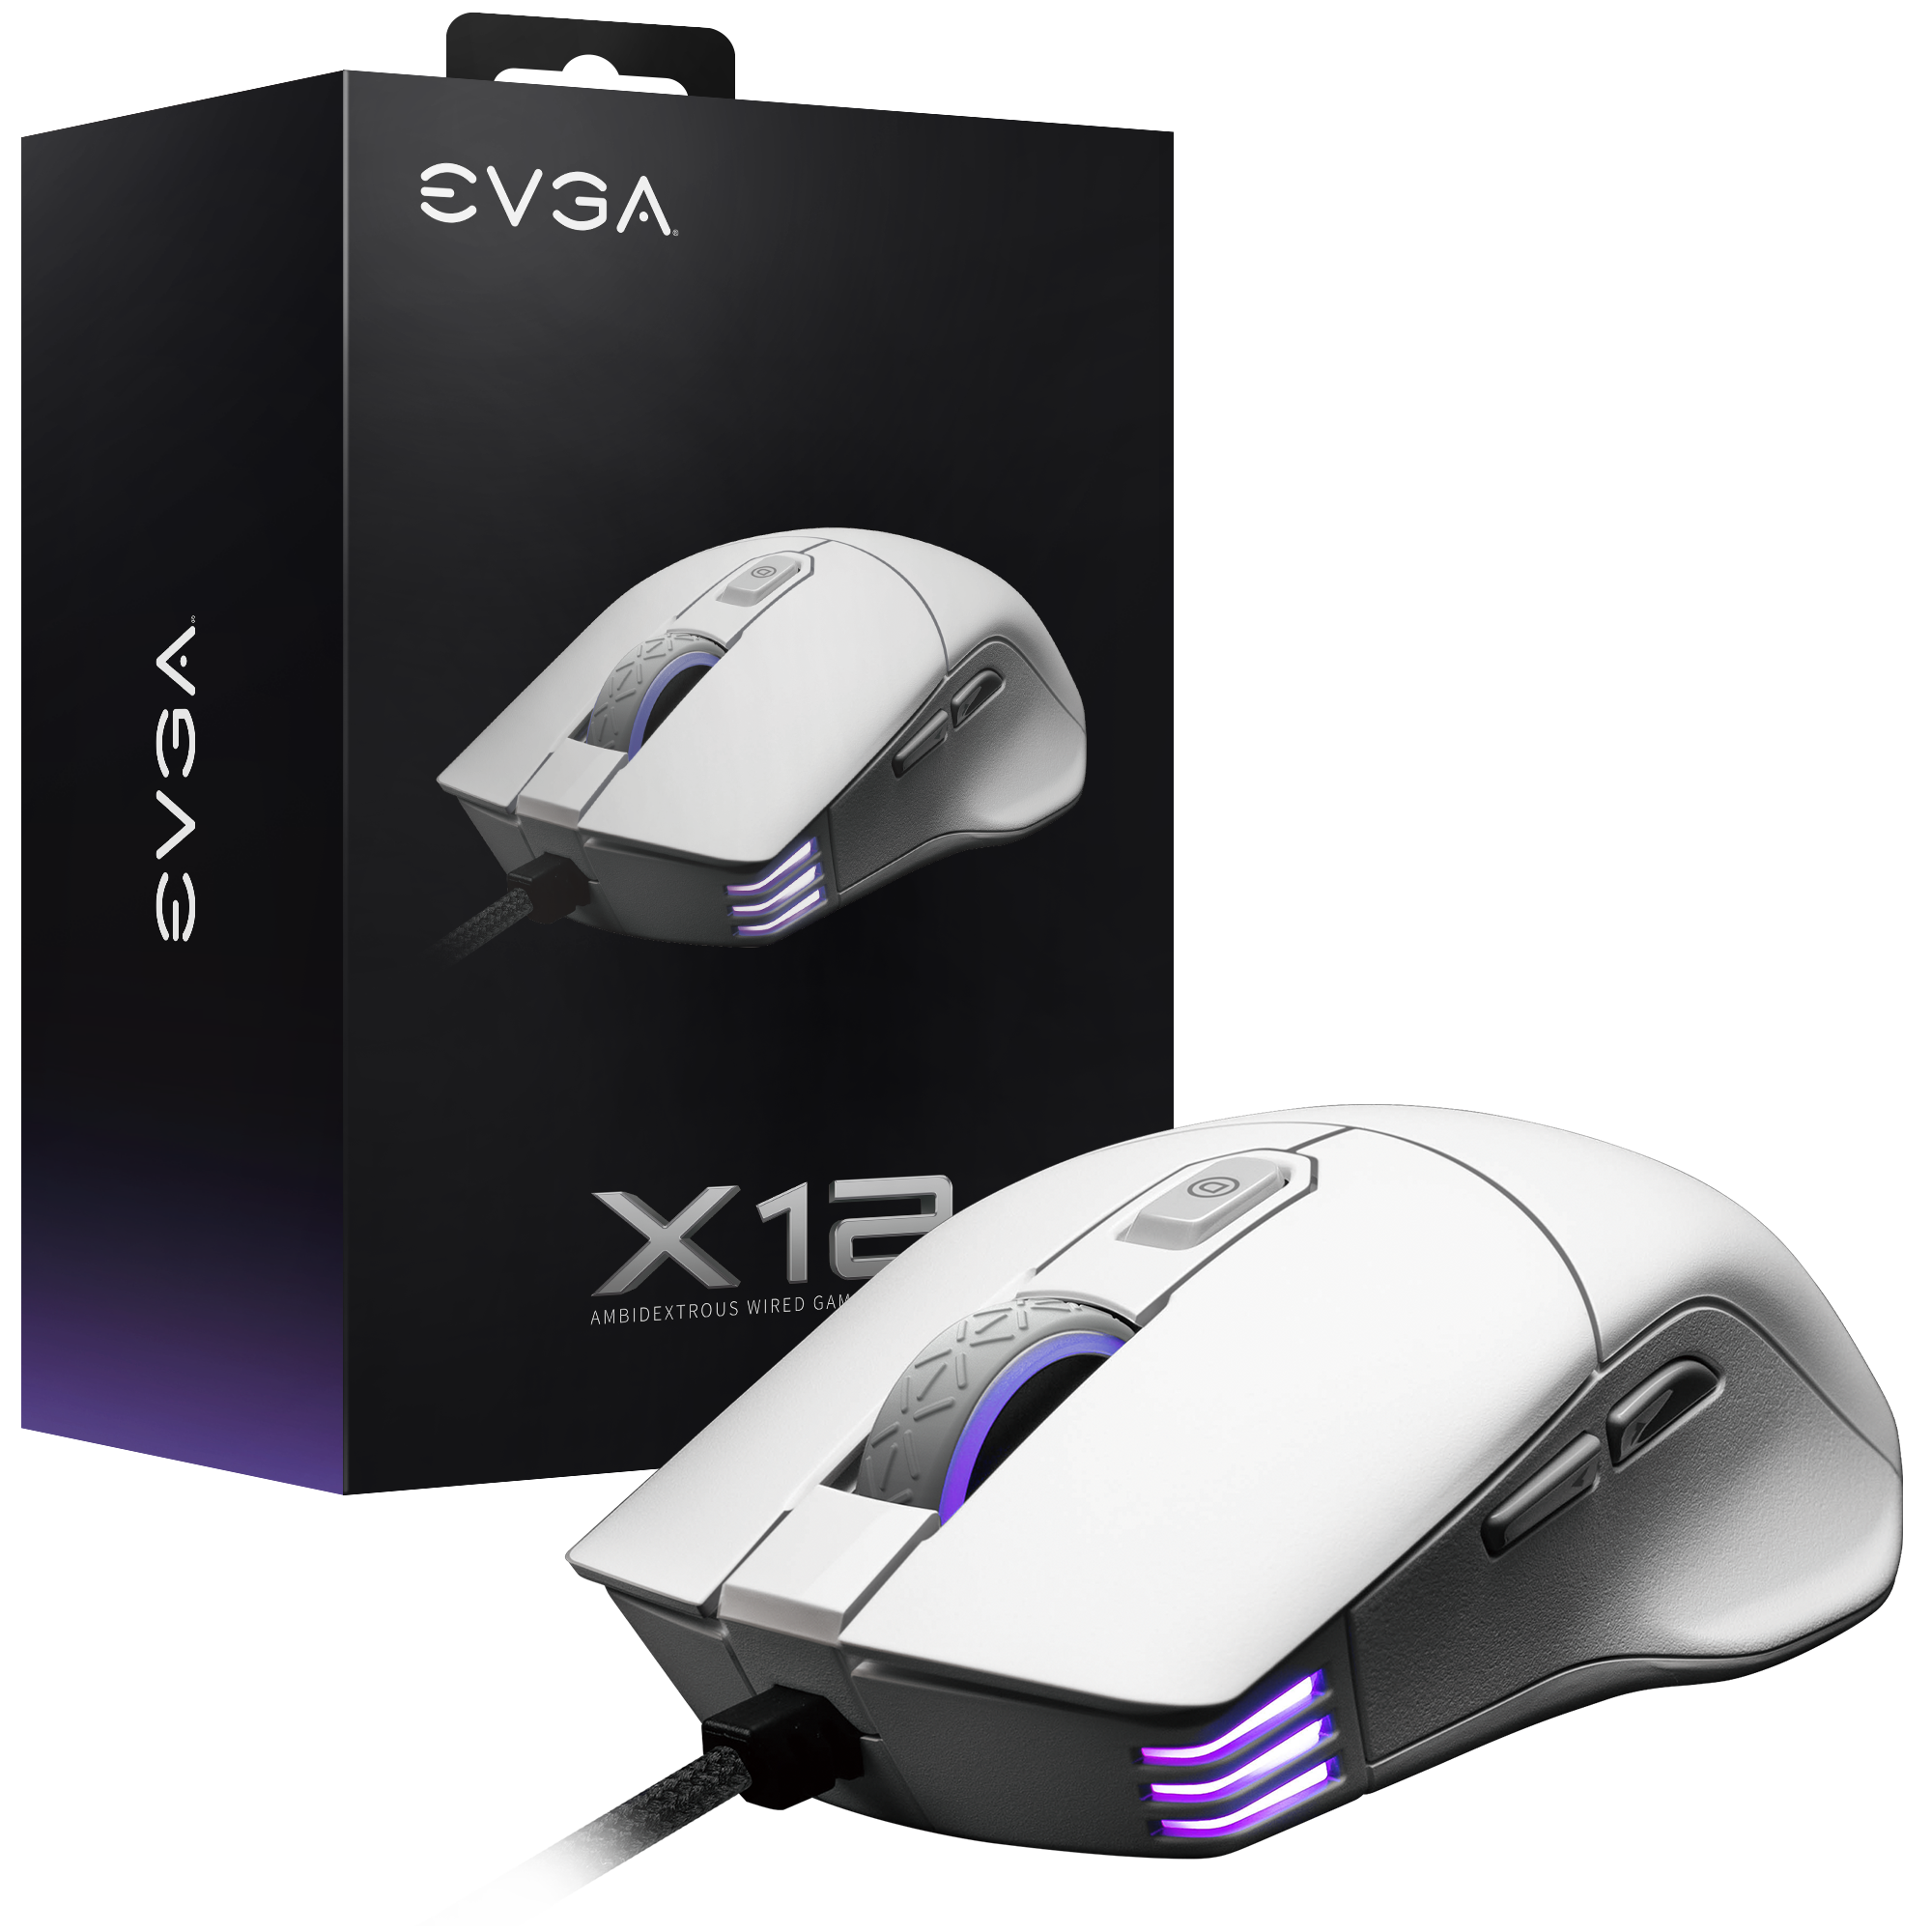 EVGA - EU - Products - EVGA X12 Gaming Mouse, 8k, Wired, White